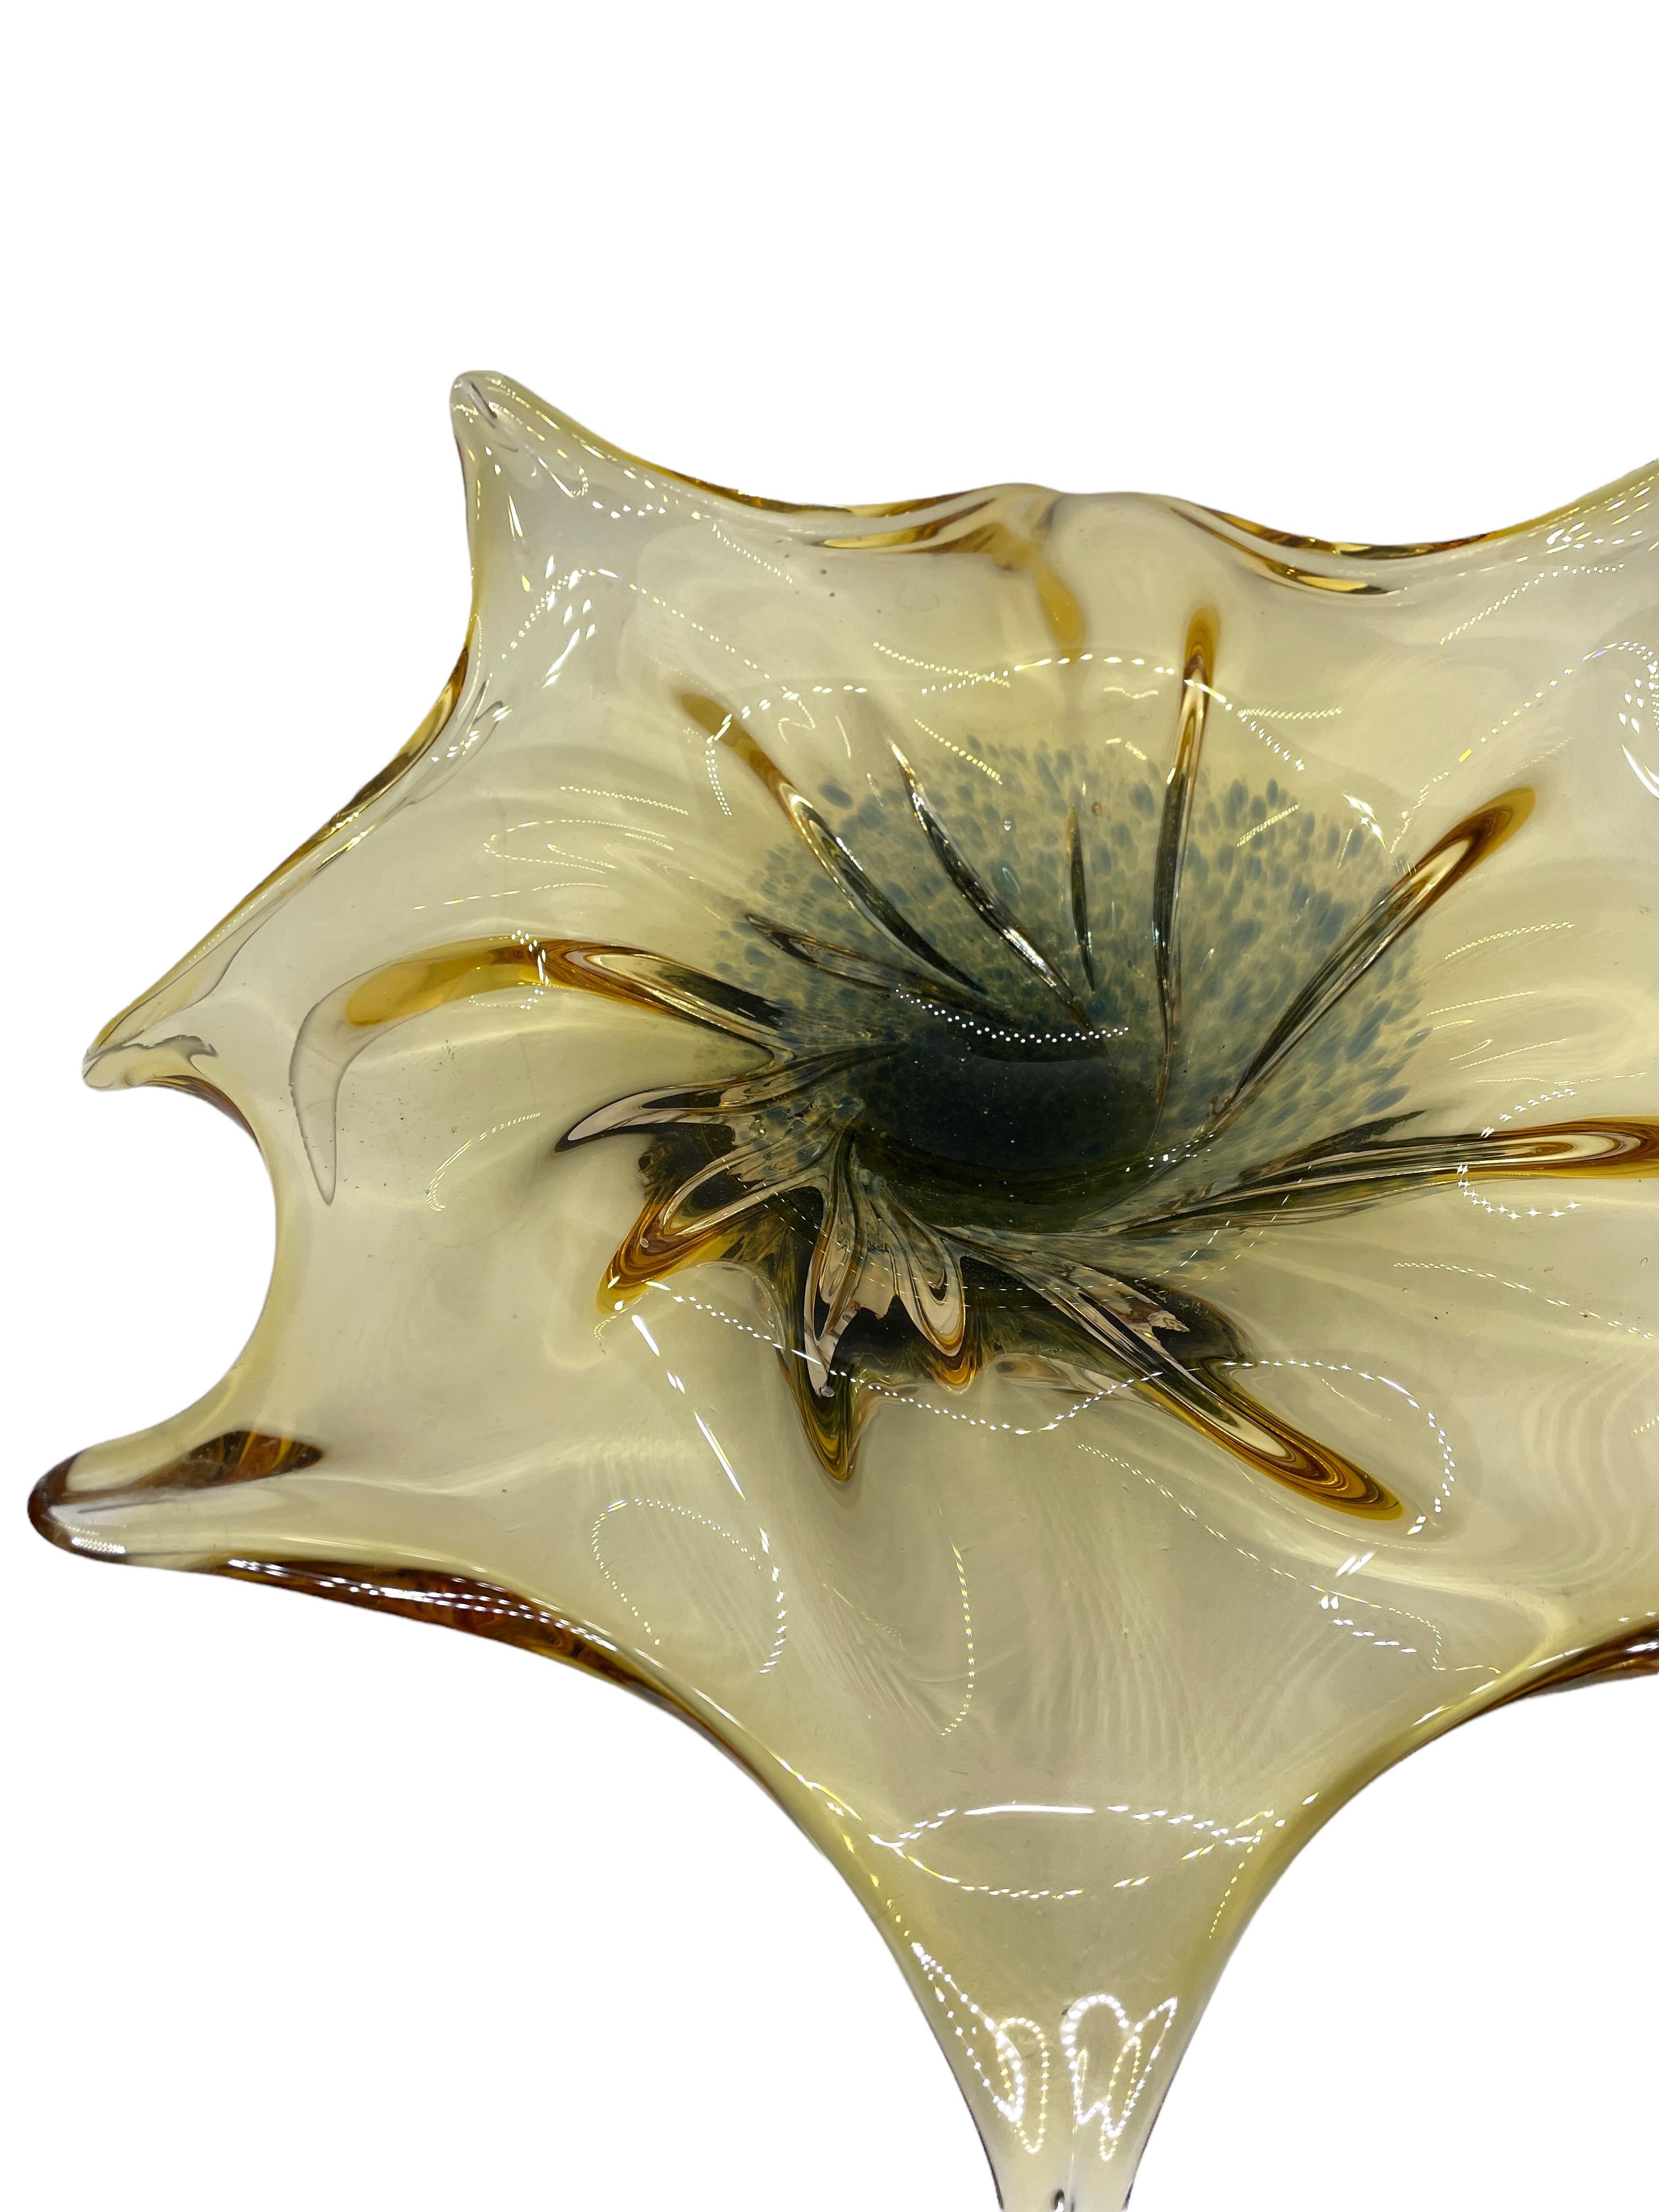 Stunning Large Organic Murano Glass Bowl Catchall Vintage, Italy, 1970s In Good Condition For Sale In Nuernberg, DE